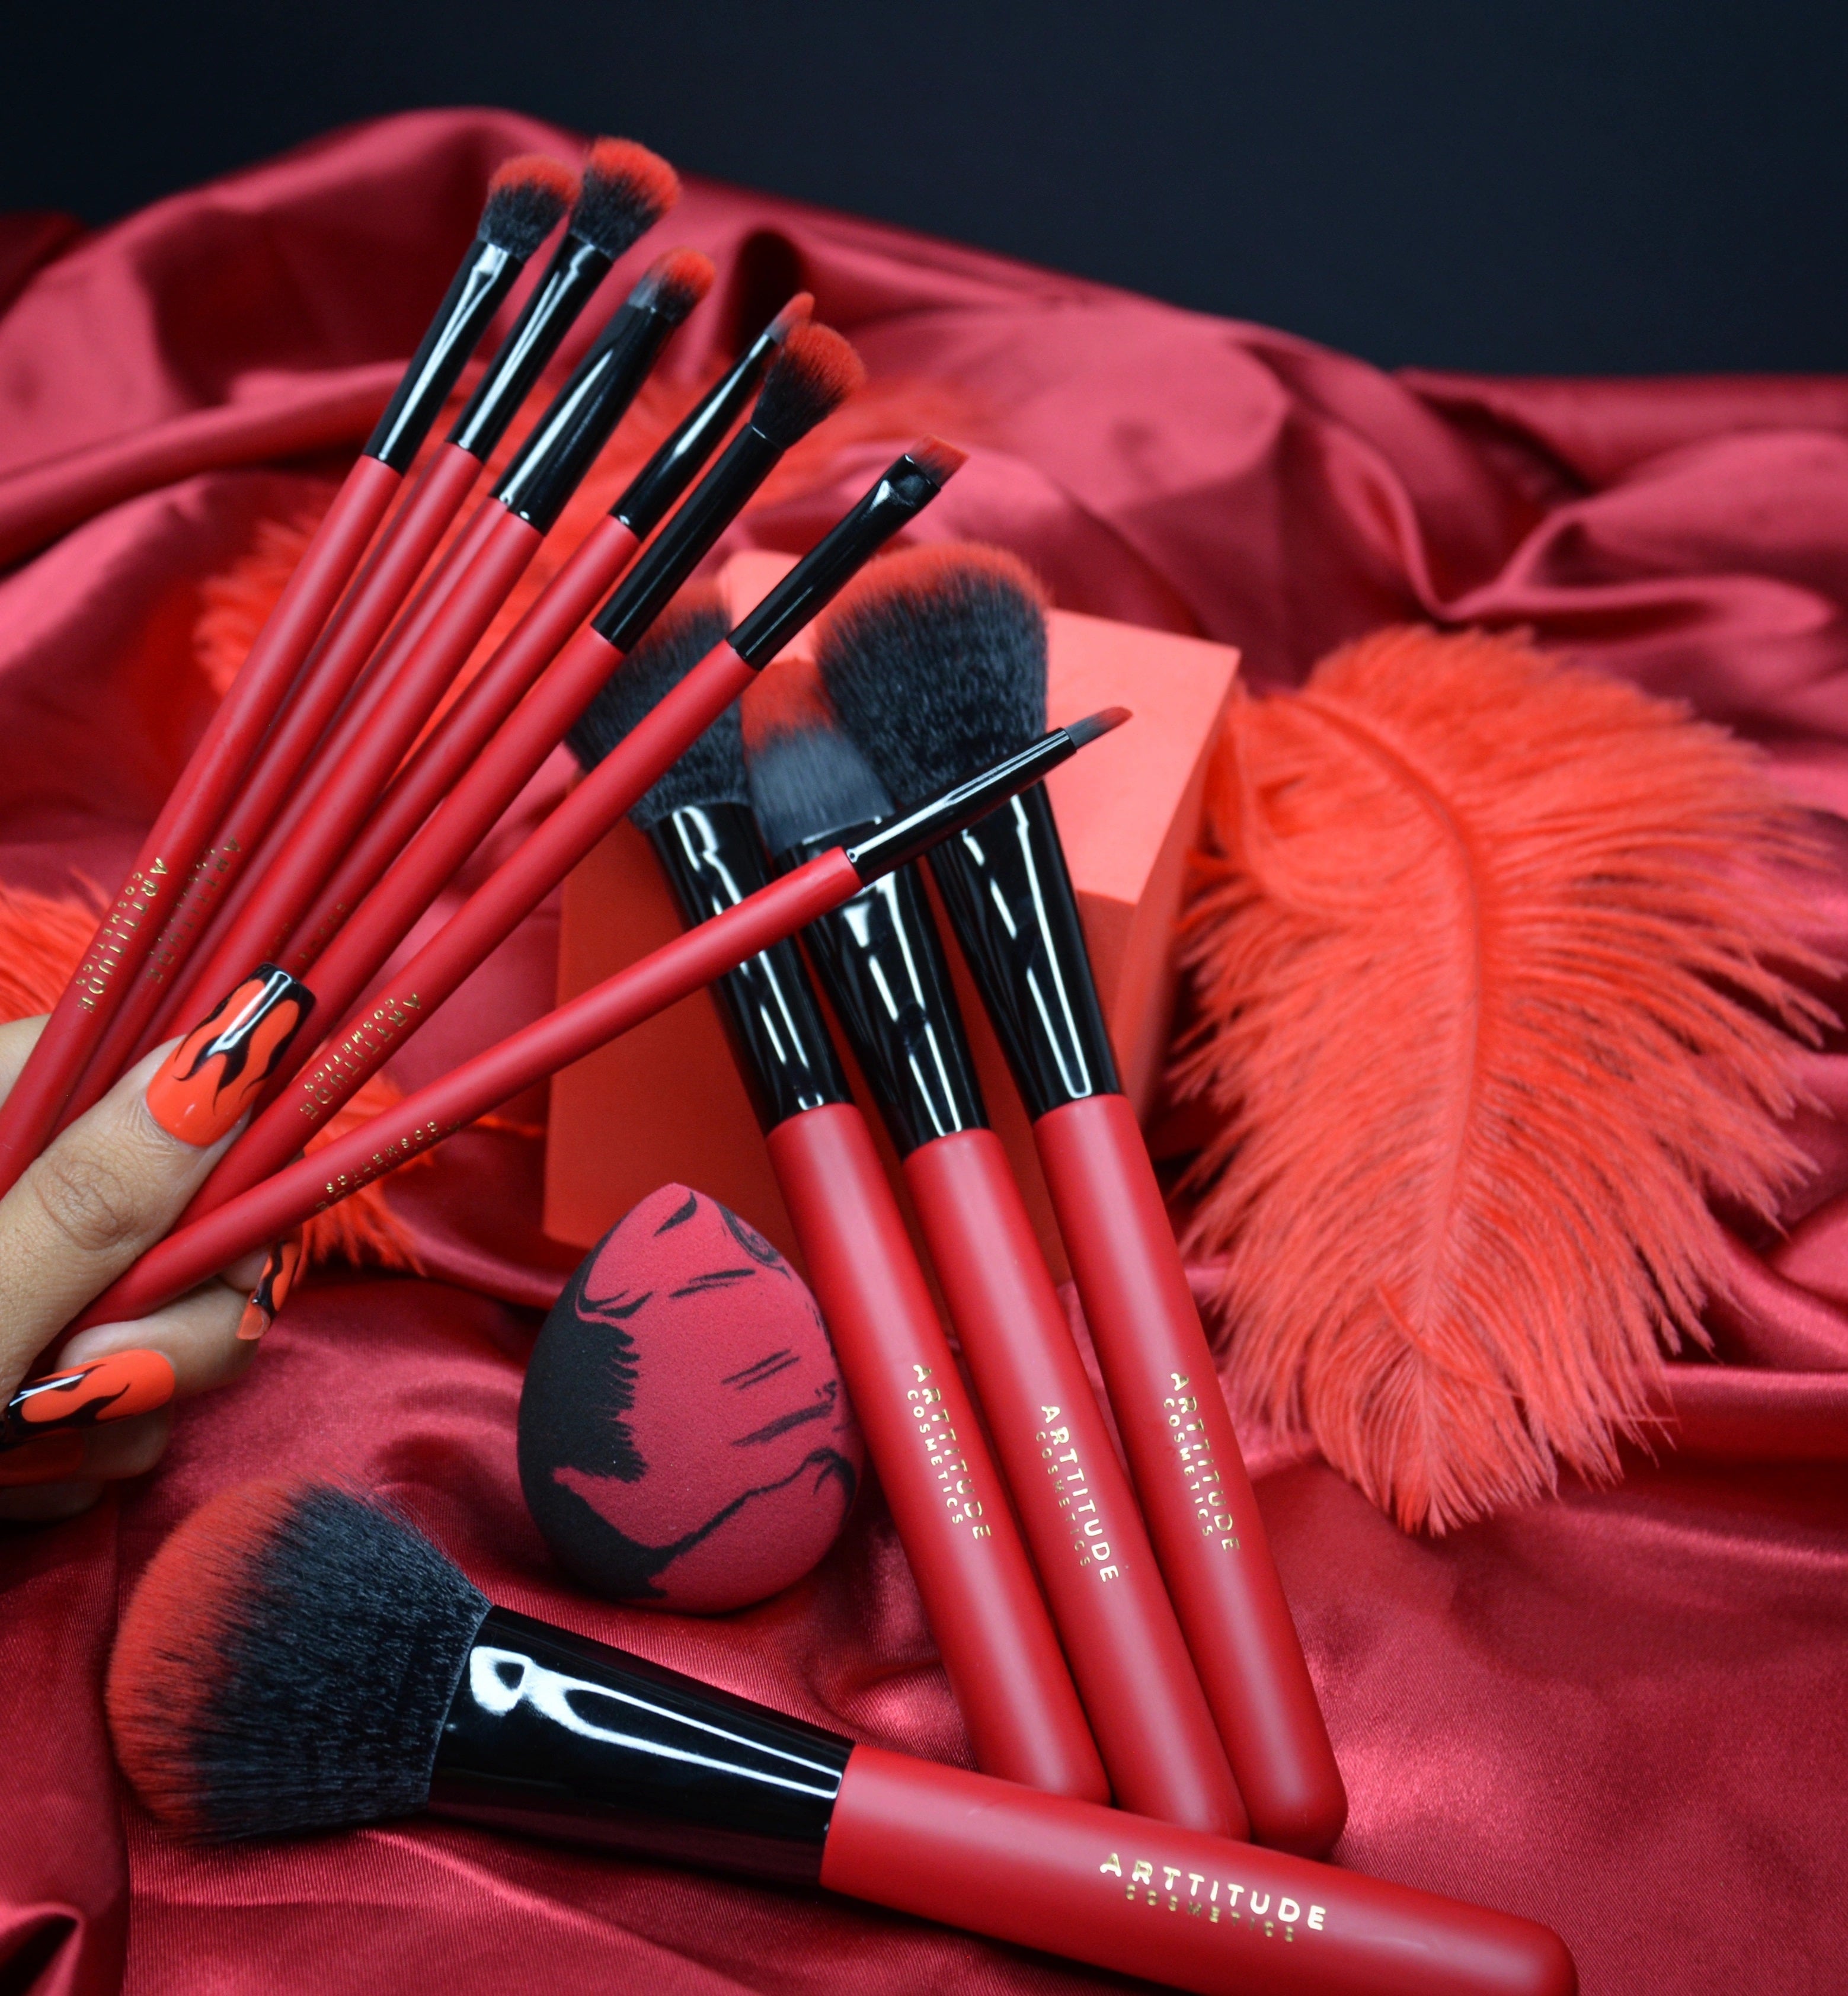 All Make-Up Brushes & Tools